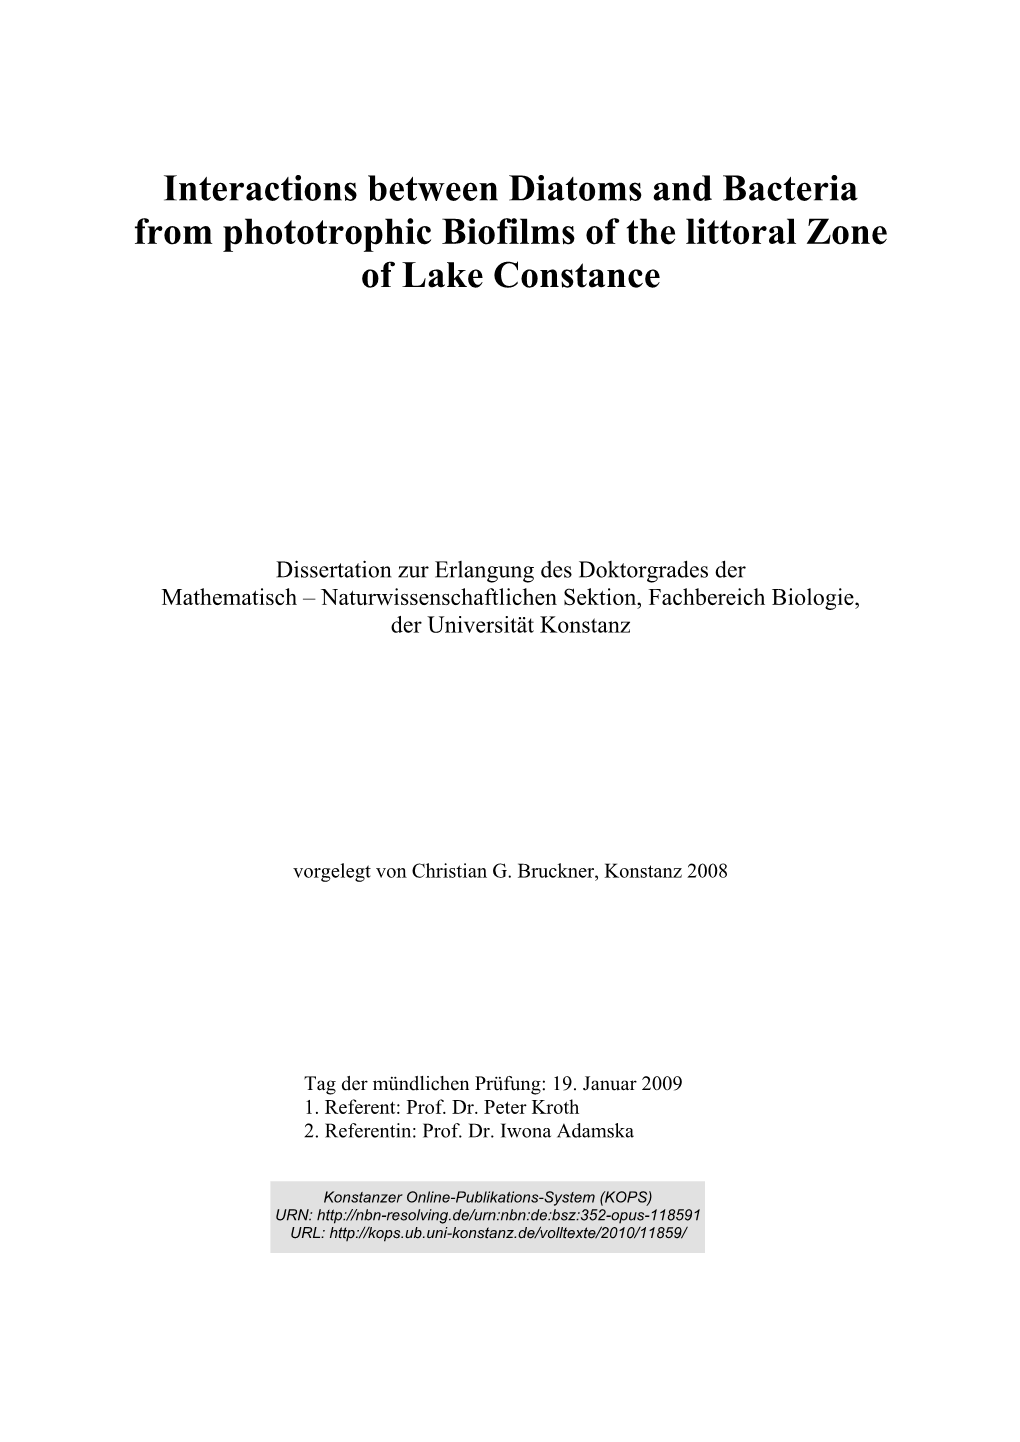 Interactions Between Diatoms and Bacteria from Phototrophic Biofilms of the Littoral Zone of Lake Constance